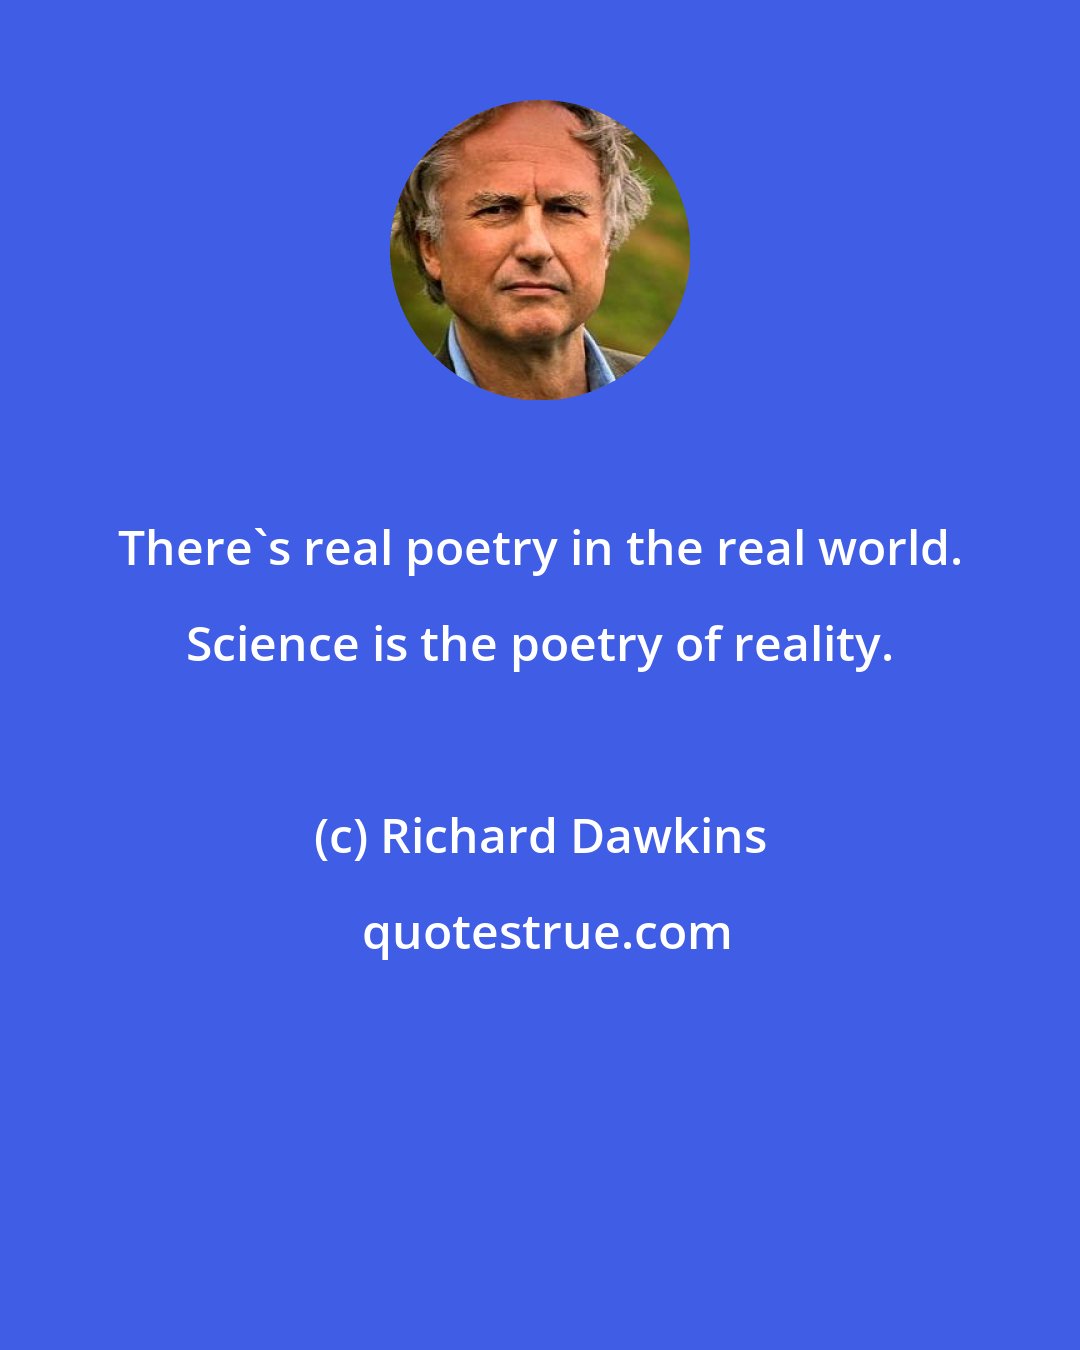 Richard Dawkins: There's real poetry in the real world. Science is the poetry of reality.